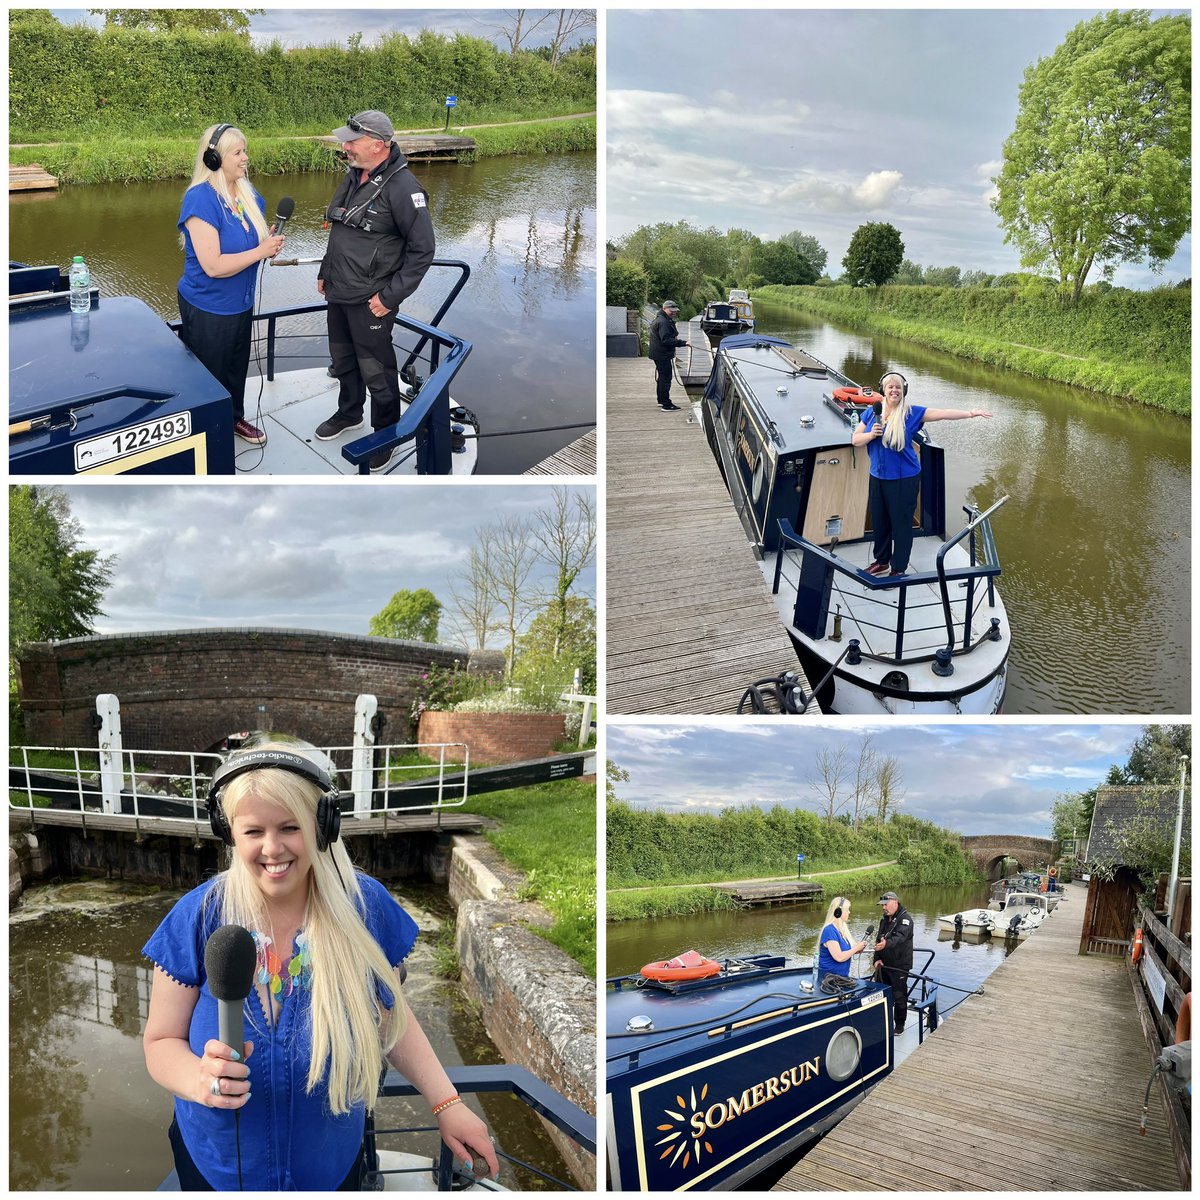 Hello #somersethour. Had a great chat with Ryan at the Somerset Boat Centre last night, whilst travelling down the Bridgwater and Taunton canal on a narrowboat 💙 You can hear highlights on BBC Radio Somerset on Monday at 10.15am and then the full conversation will be on